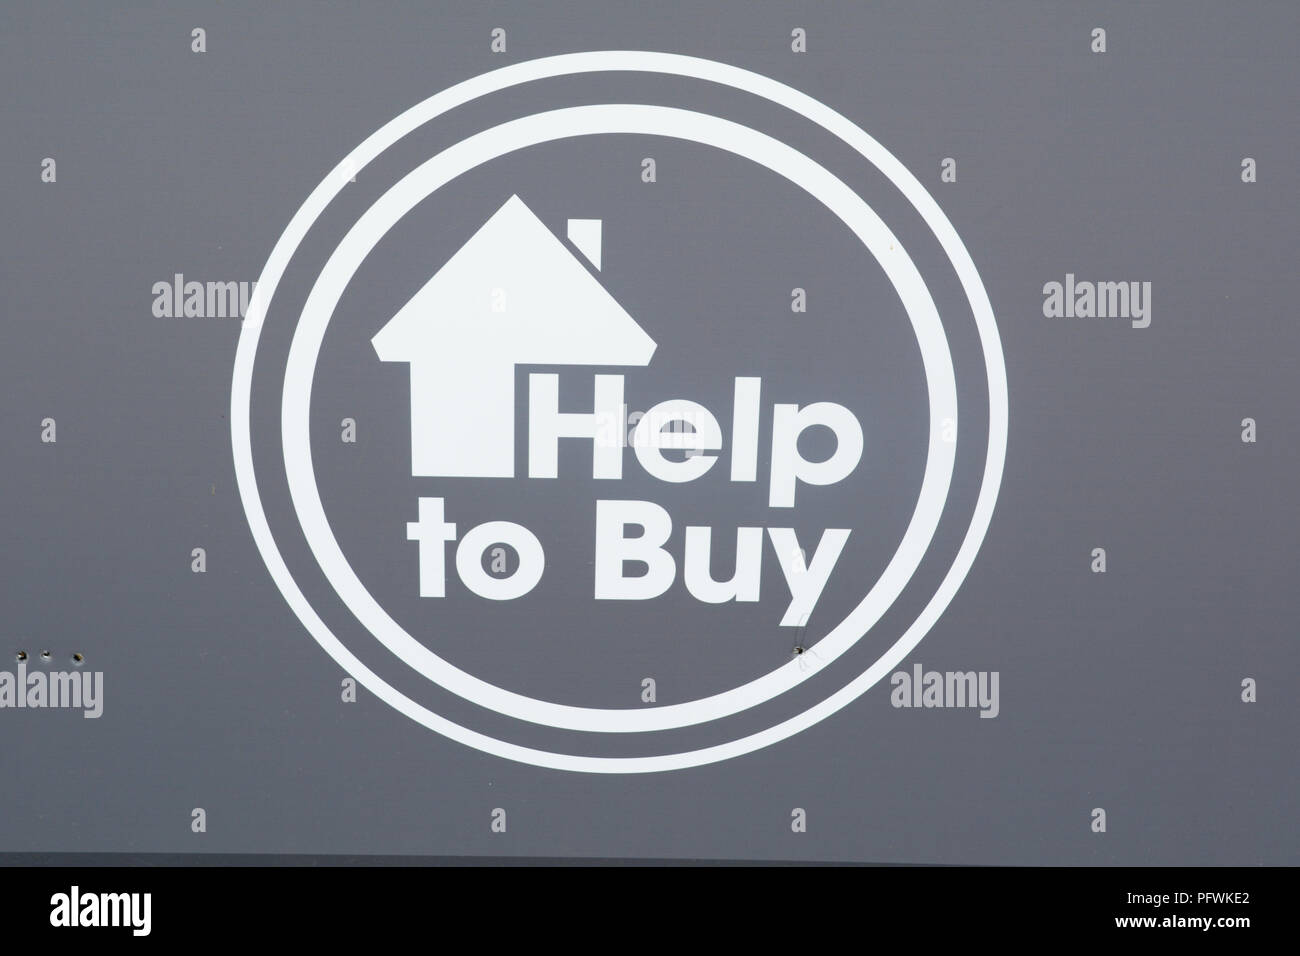 Help to Buy sign logo Stock Photo